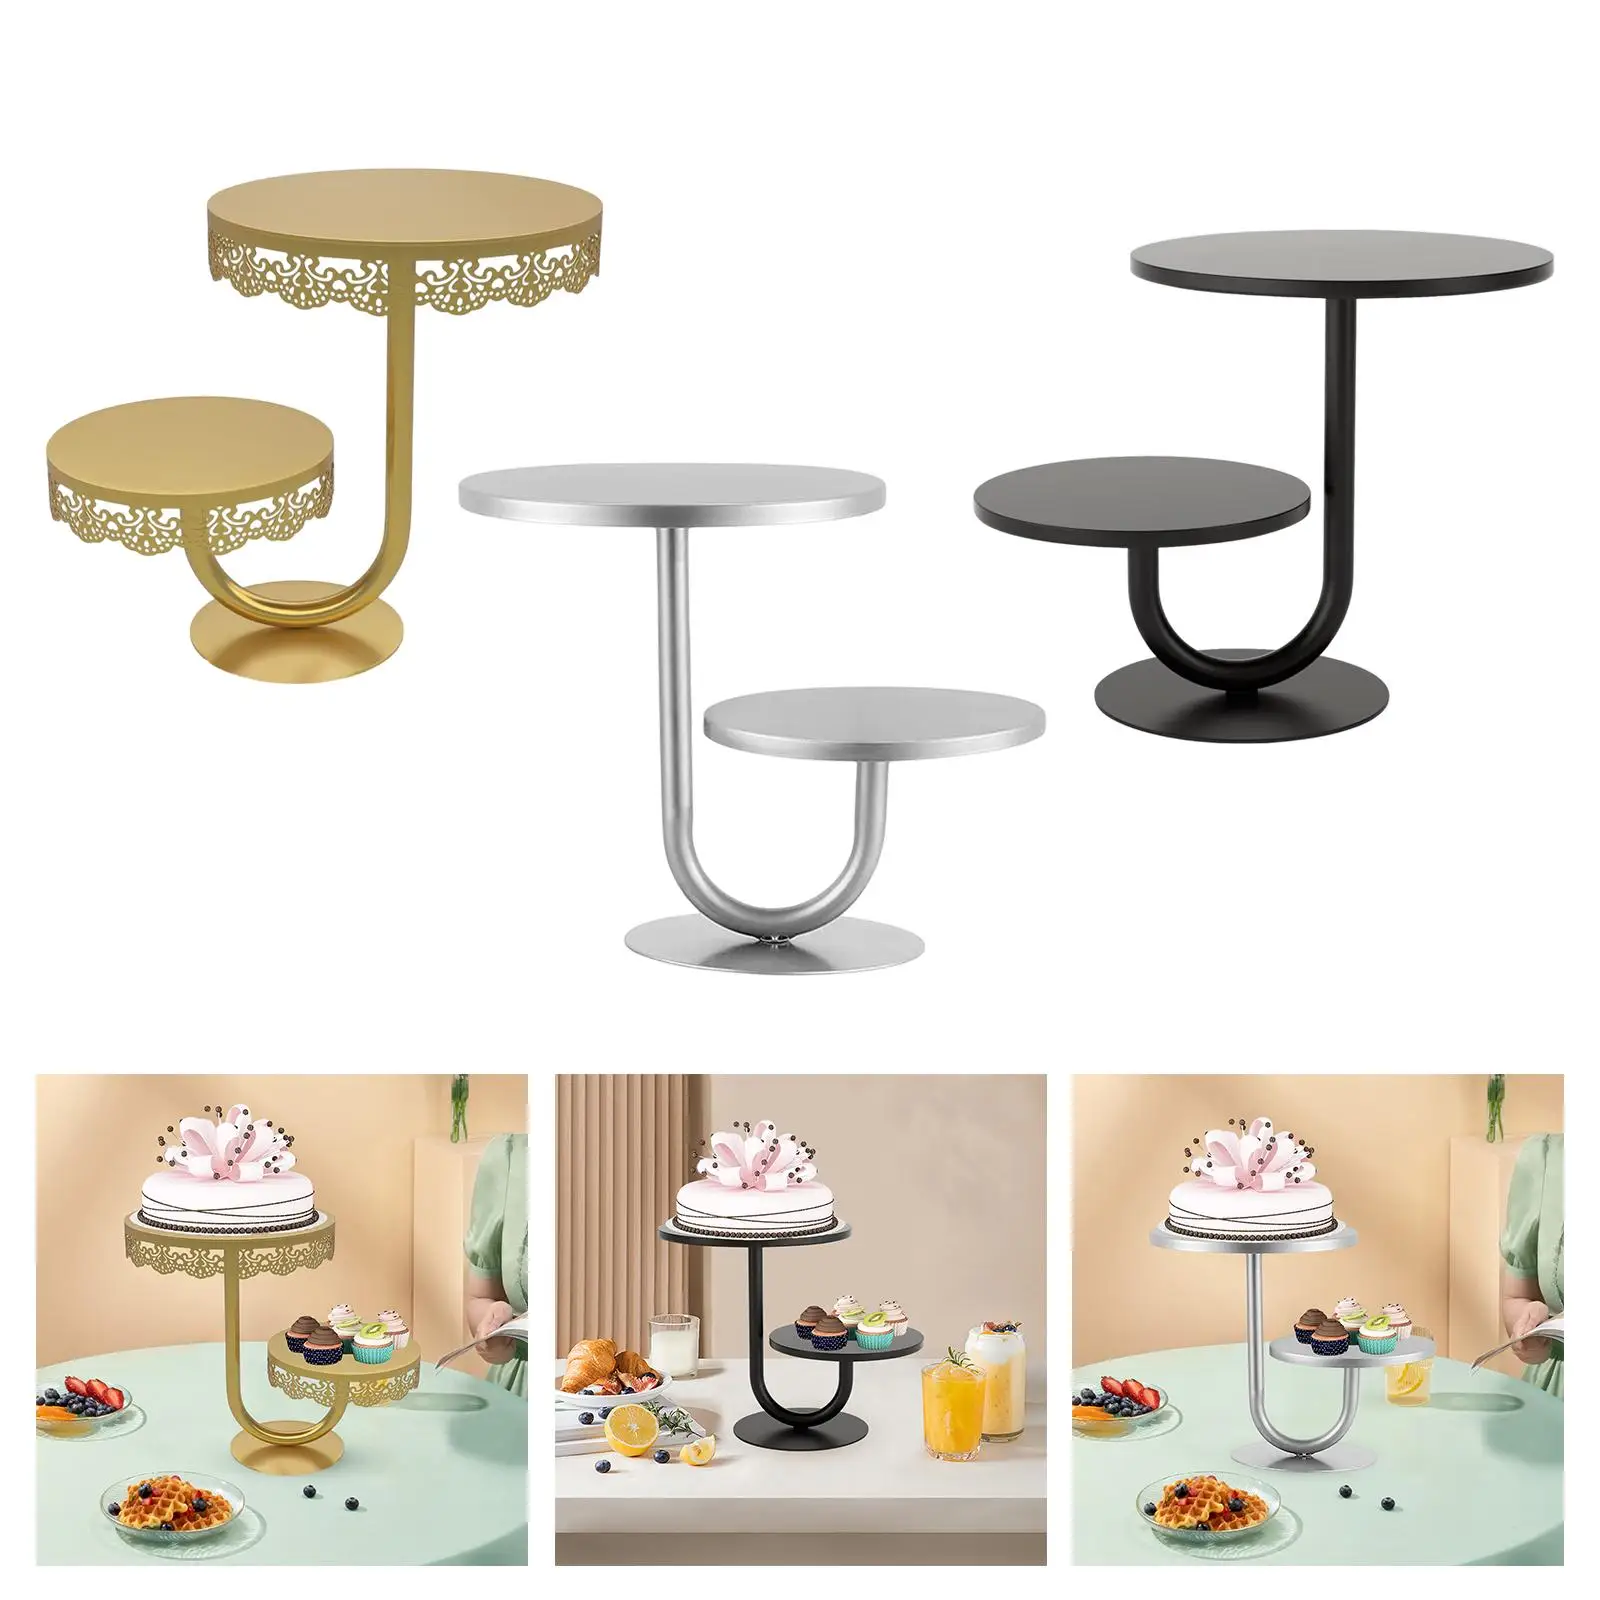 Round Cupcake Stands Display Stand Cake Stand Display Holder for Birthday Buffet Wedding